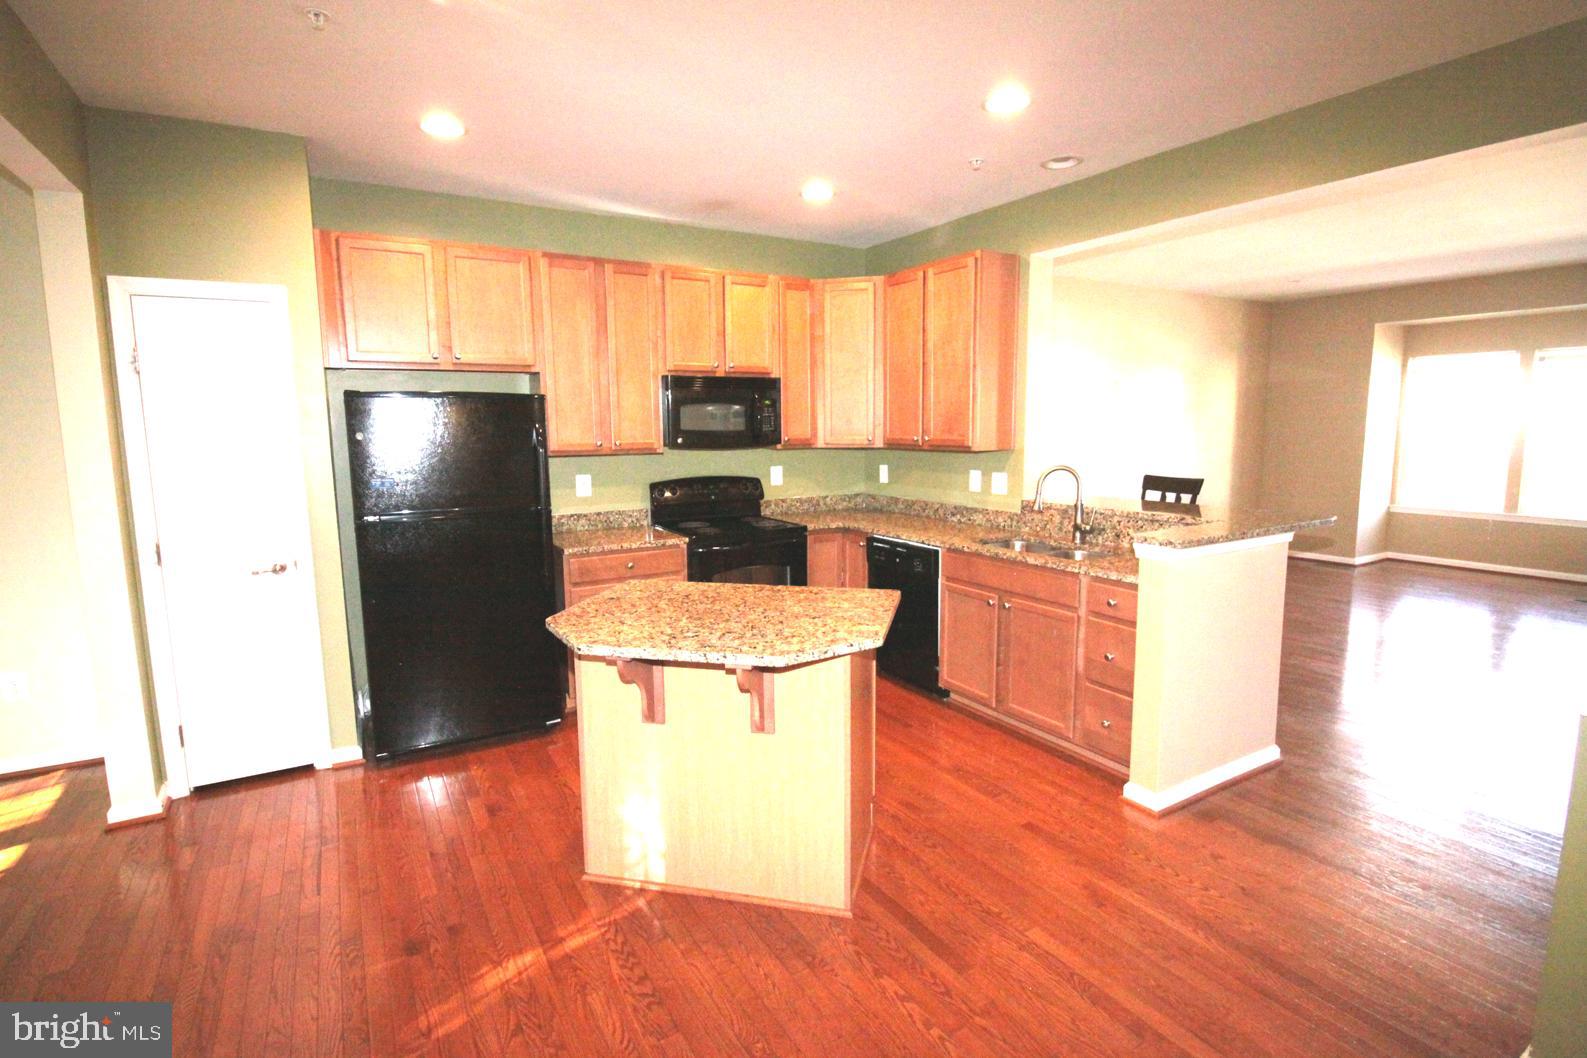 a kitchen with stainless steel appliances a refrigerator a sink a stove a microwave a center island and wooden floor